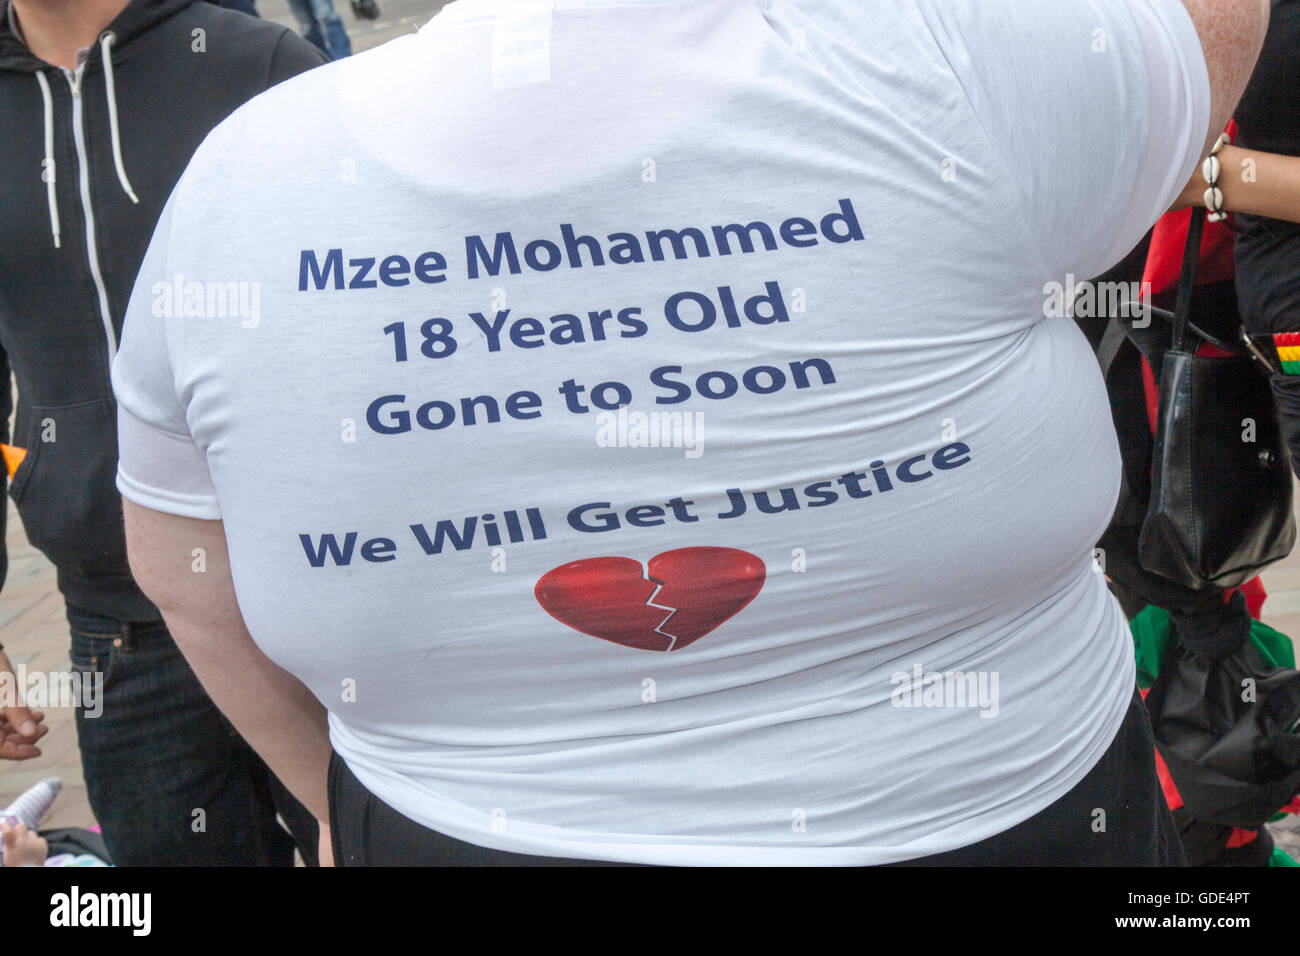 Liverpool, Merseyside, UK. 16th July, 2016. Mzee Mohammed Protest.  Family and mourners protest through the streets of Liverpool after the death of 18yr old Mzee Mohammed, whilst in police custody.  The youth was allegedly seen 'behaving erratically' in the Liverpool One shopping centre by security staff.  The IPCC have begun an investigation into the teens untimely death.  Credit:  Cernan Elias/Alamy Live News Stock Photo